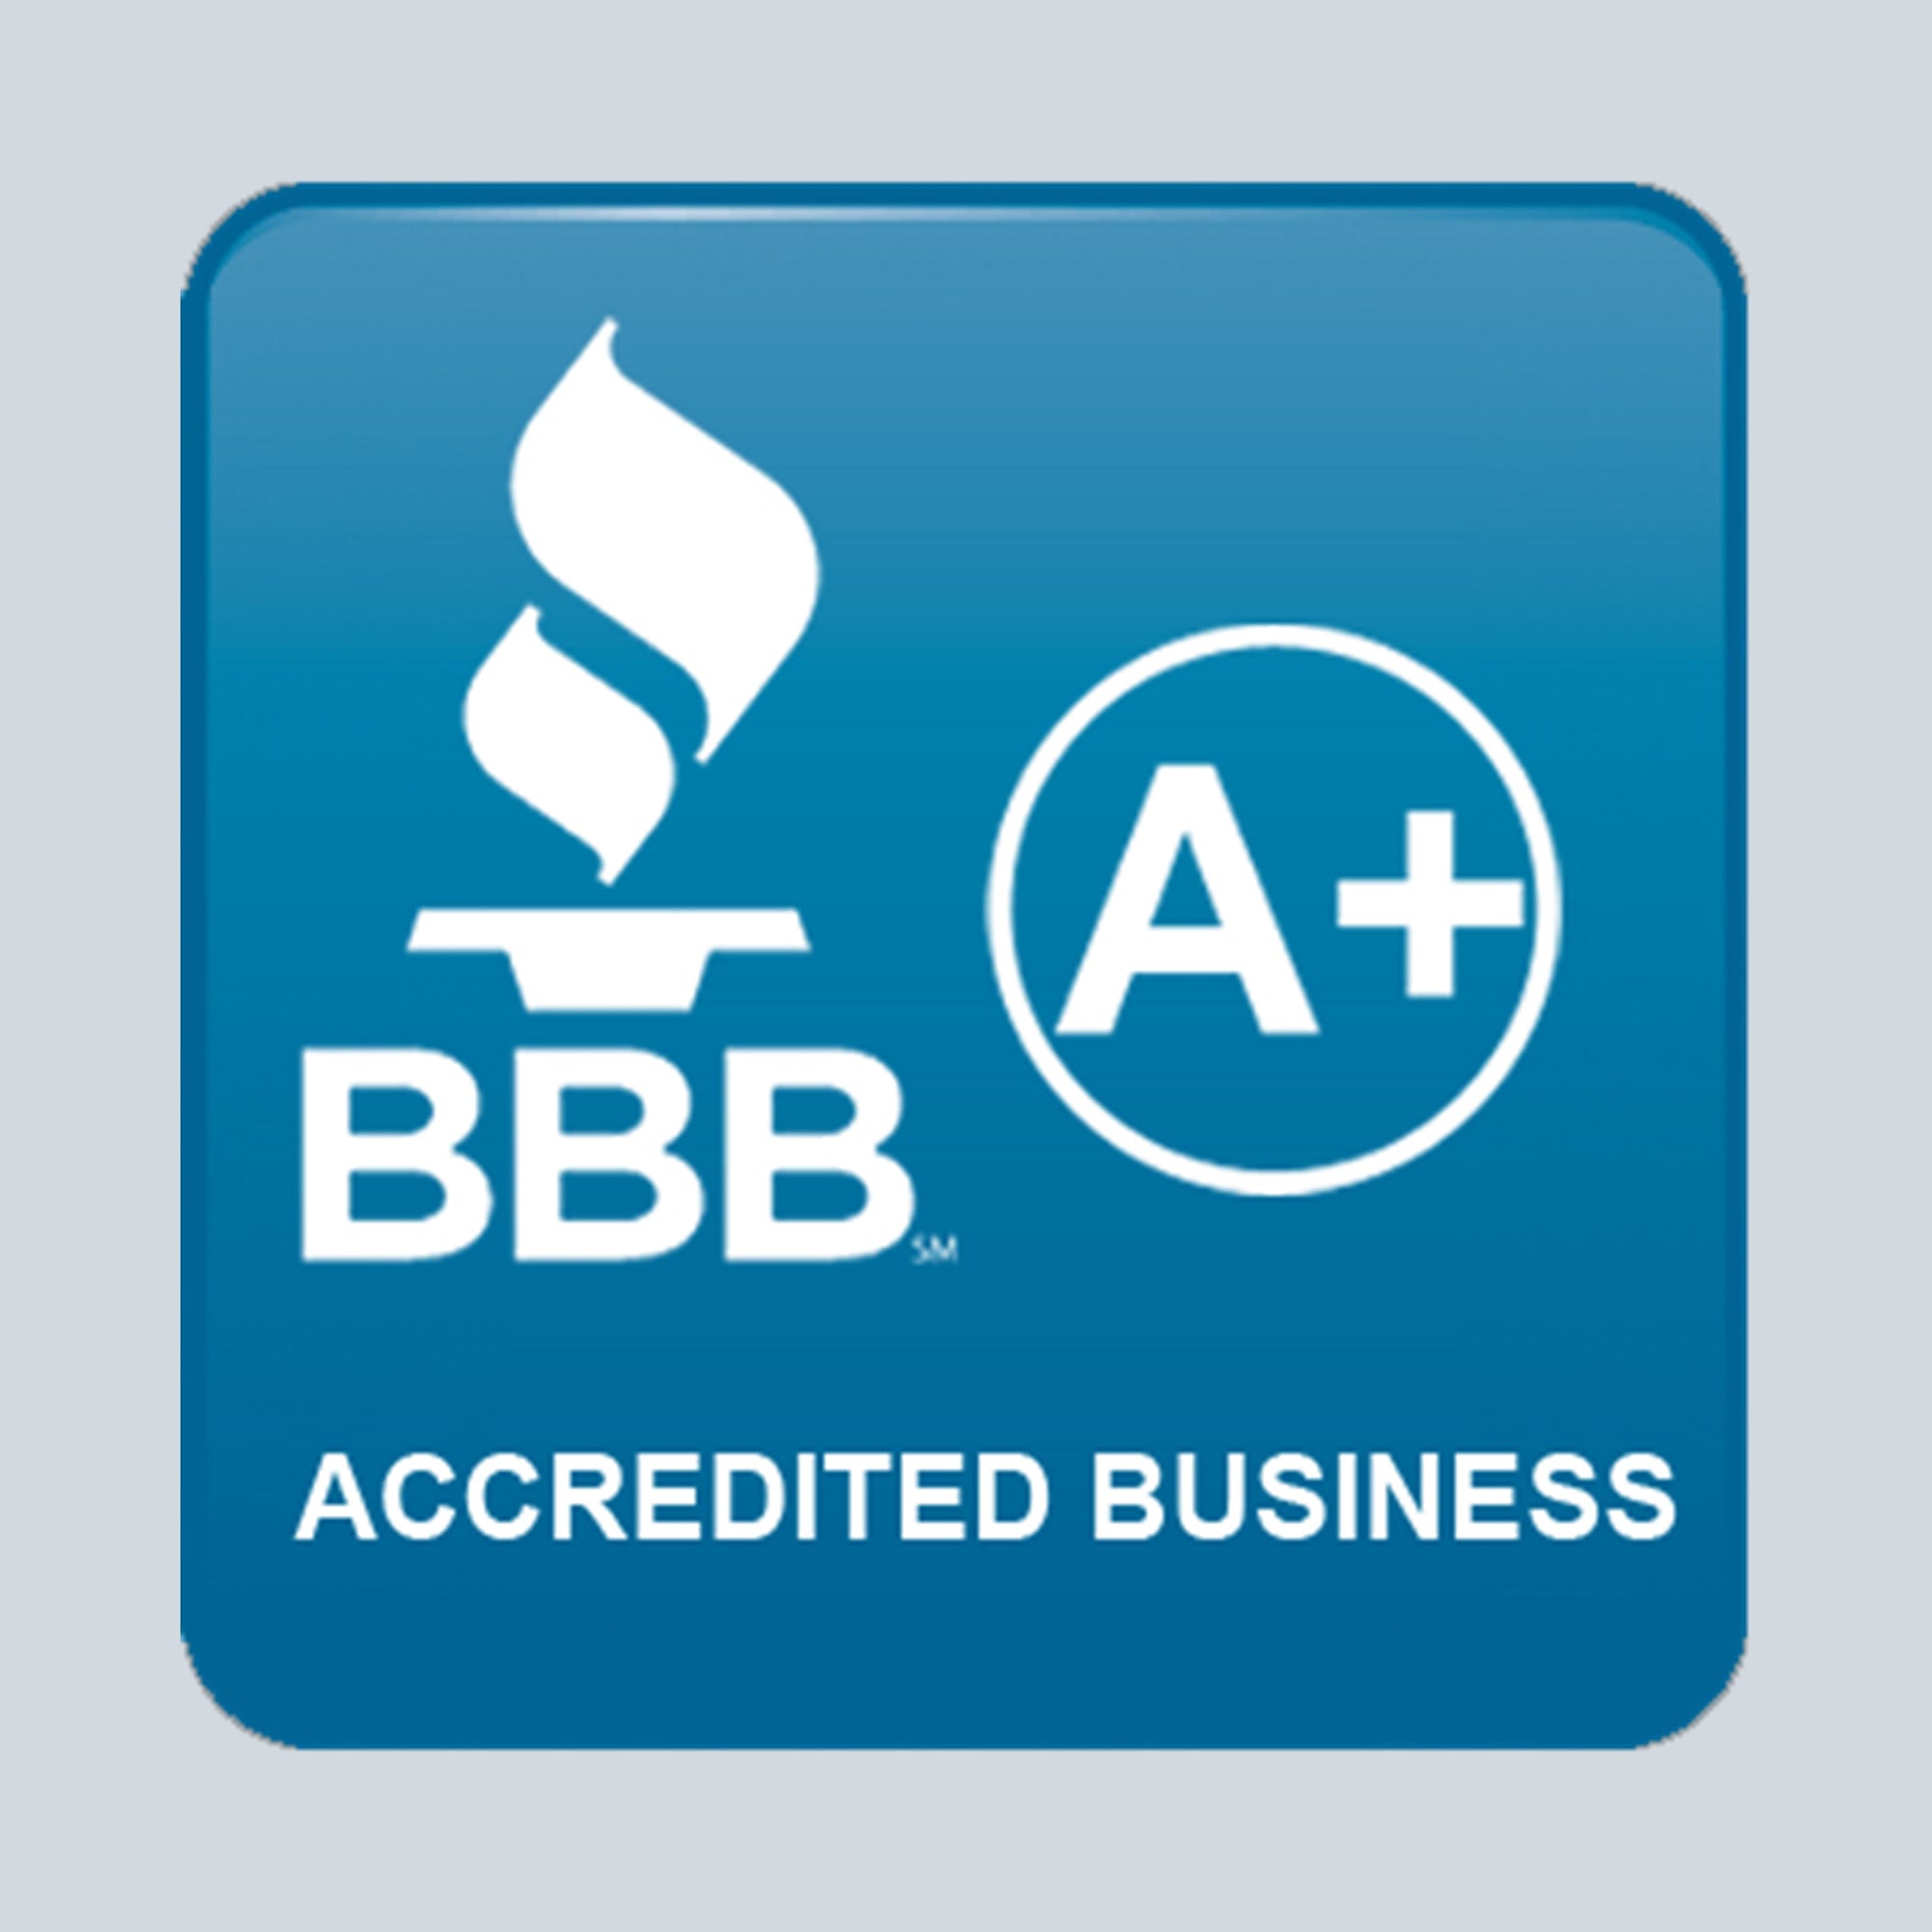 toe beans is a BBB Accredited Business